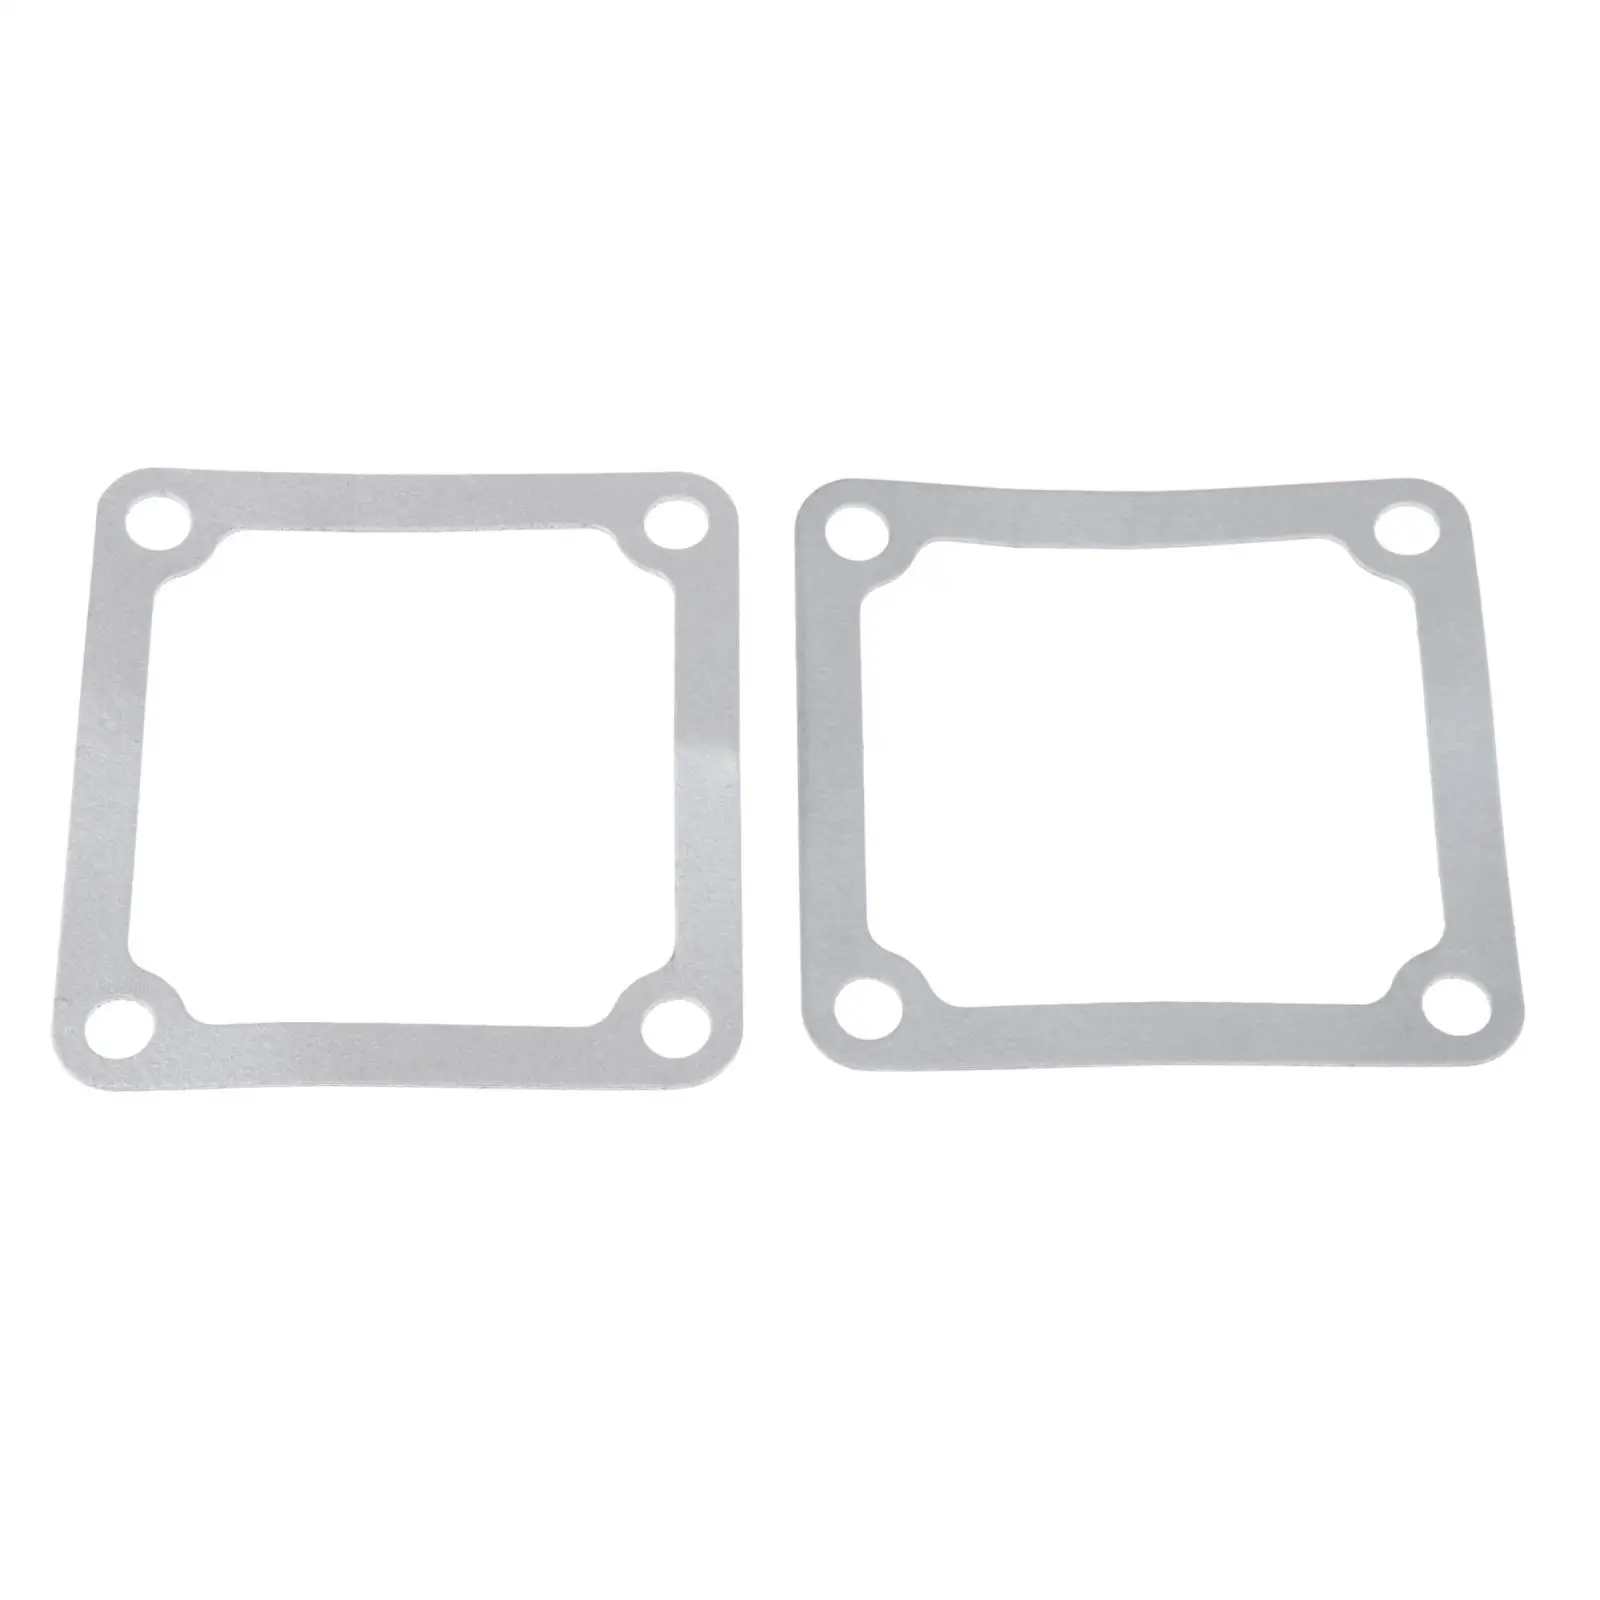 2 Pieces Intake Heater Grid Gaskets Auto Parts Accessory 5.9L Strong Sealing